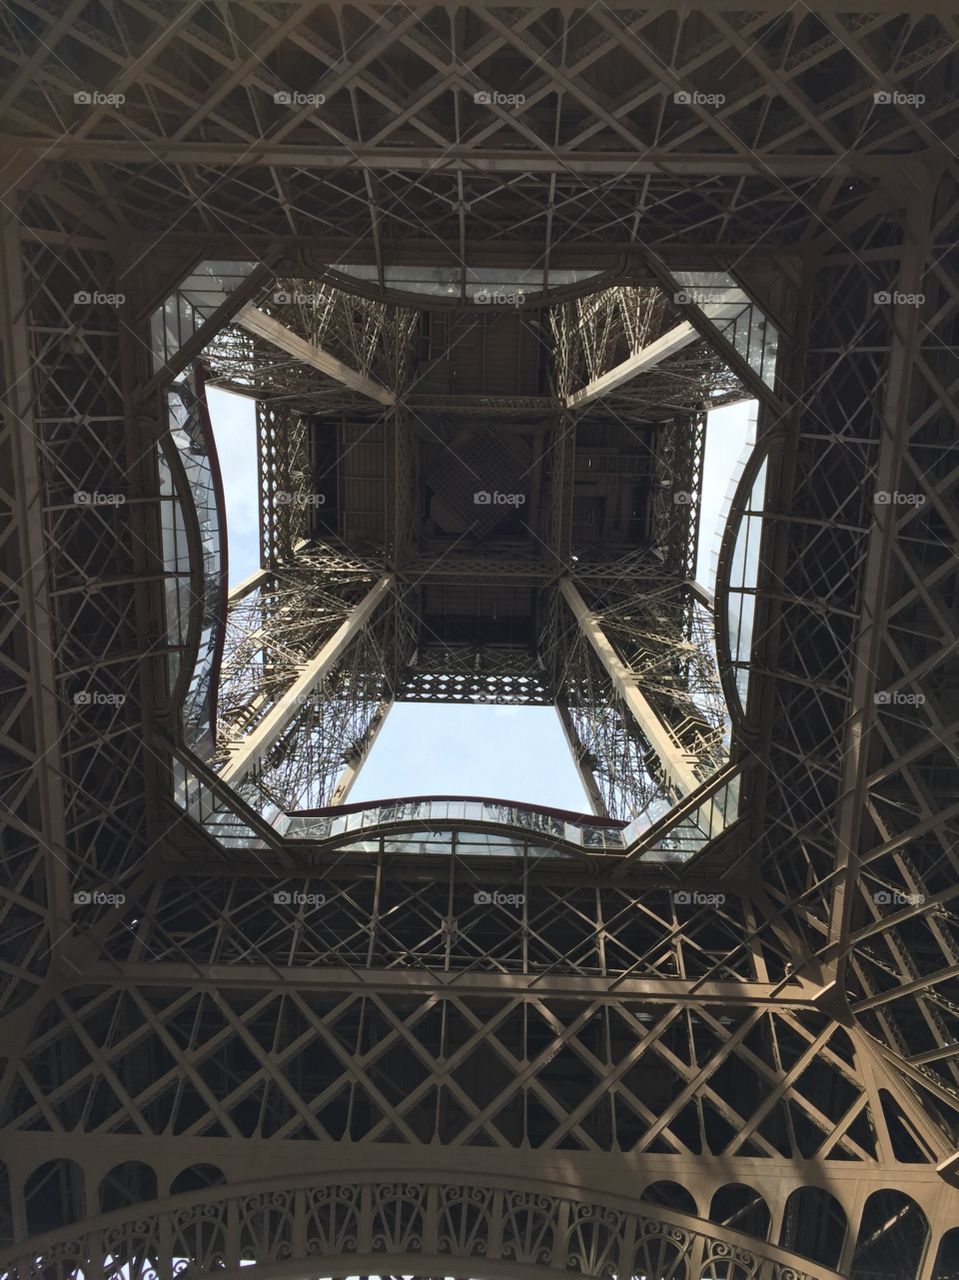 View from under the Eiffel Tower 